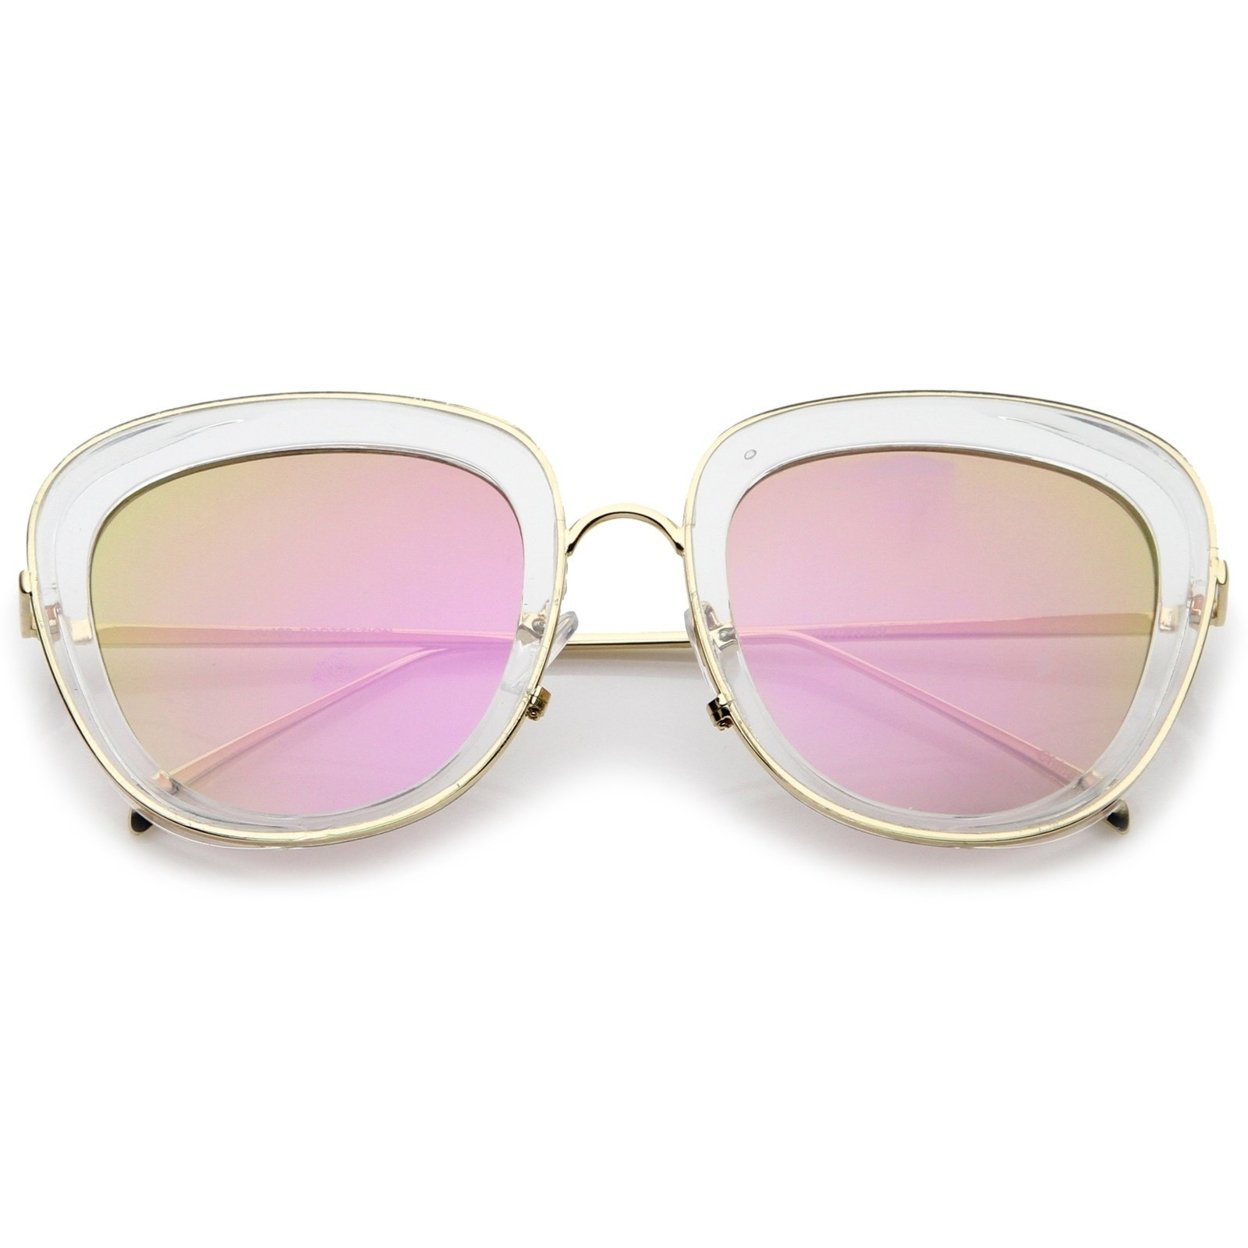 Women's Transparent Frame Square Colored Mirror Lens Oversize Sunglasses 53mm - Clear-Gold / Blue Mirror